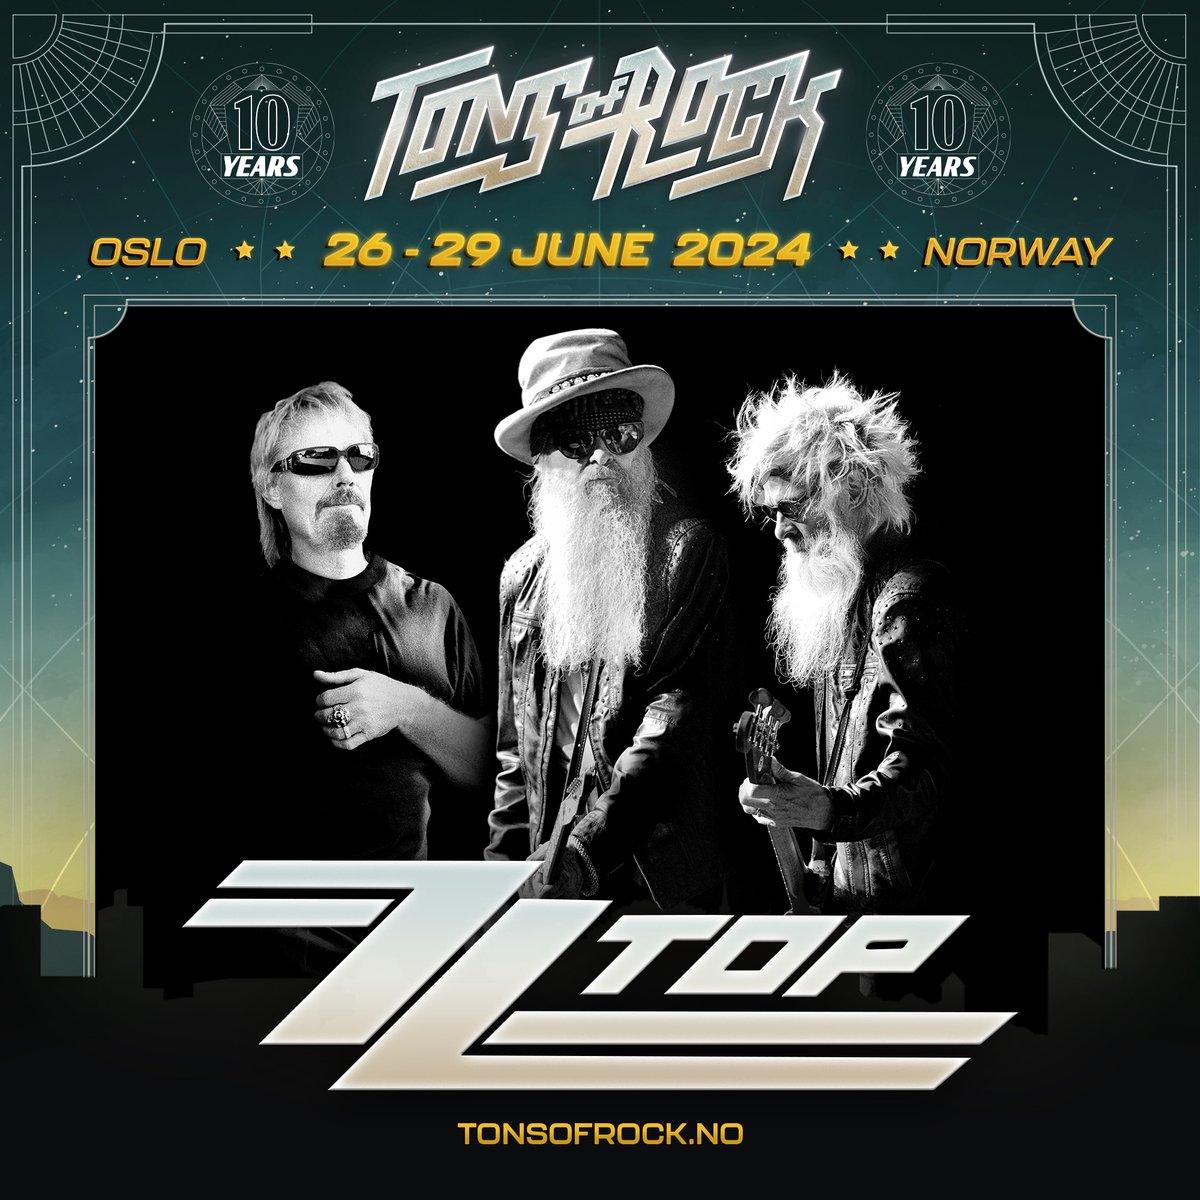 ZZ Top has joined the lineup for Tons of Rock festival in Norway! 🎸 Get ready to see the legendary lineup June 26 - June 29, 2024. Tickets are on sale now at ticketmaster.no/artist/tons-of…